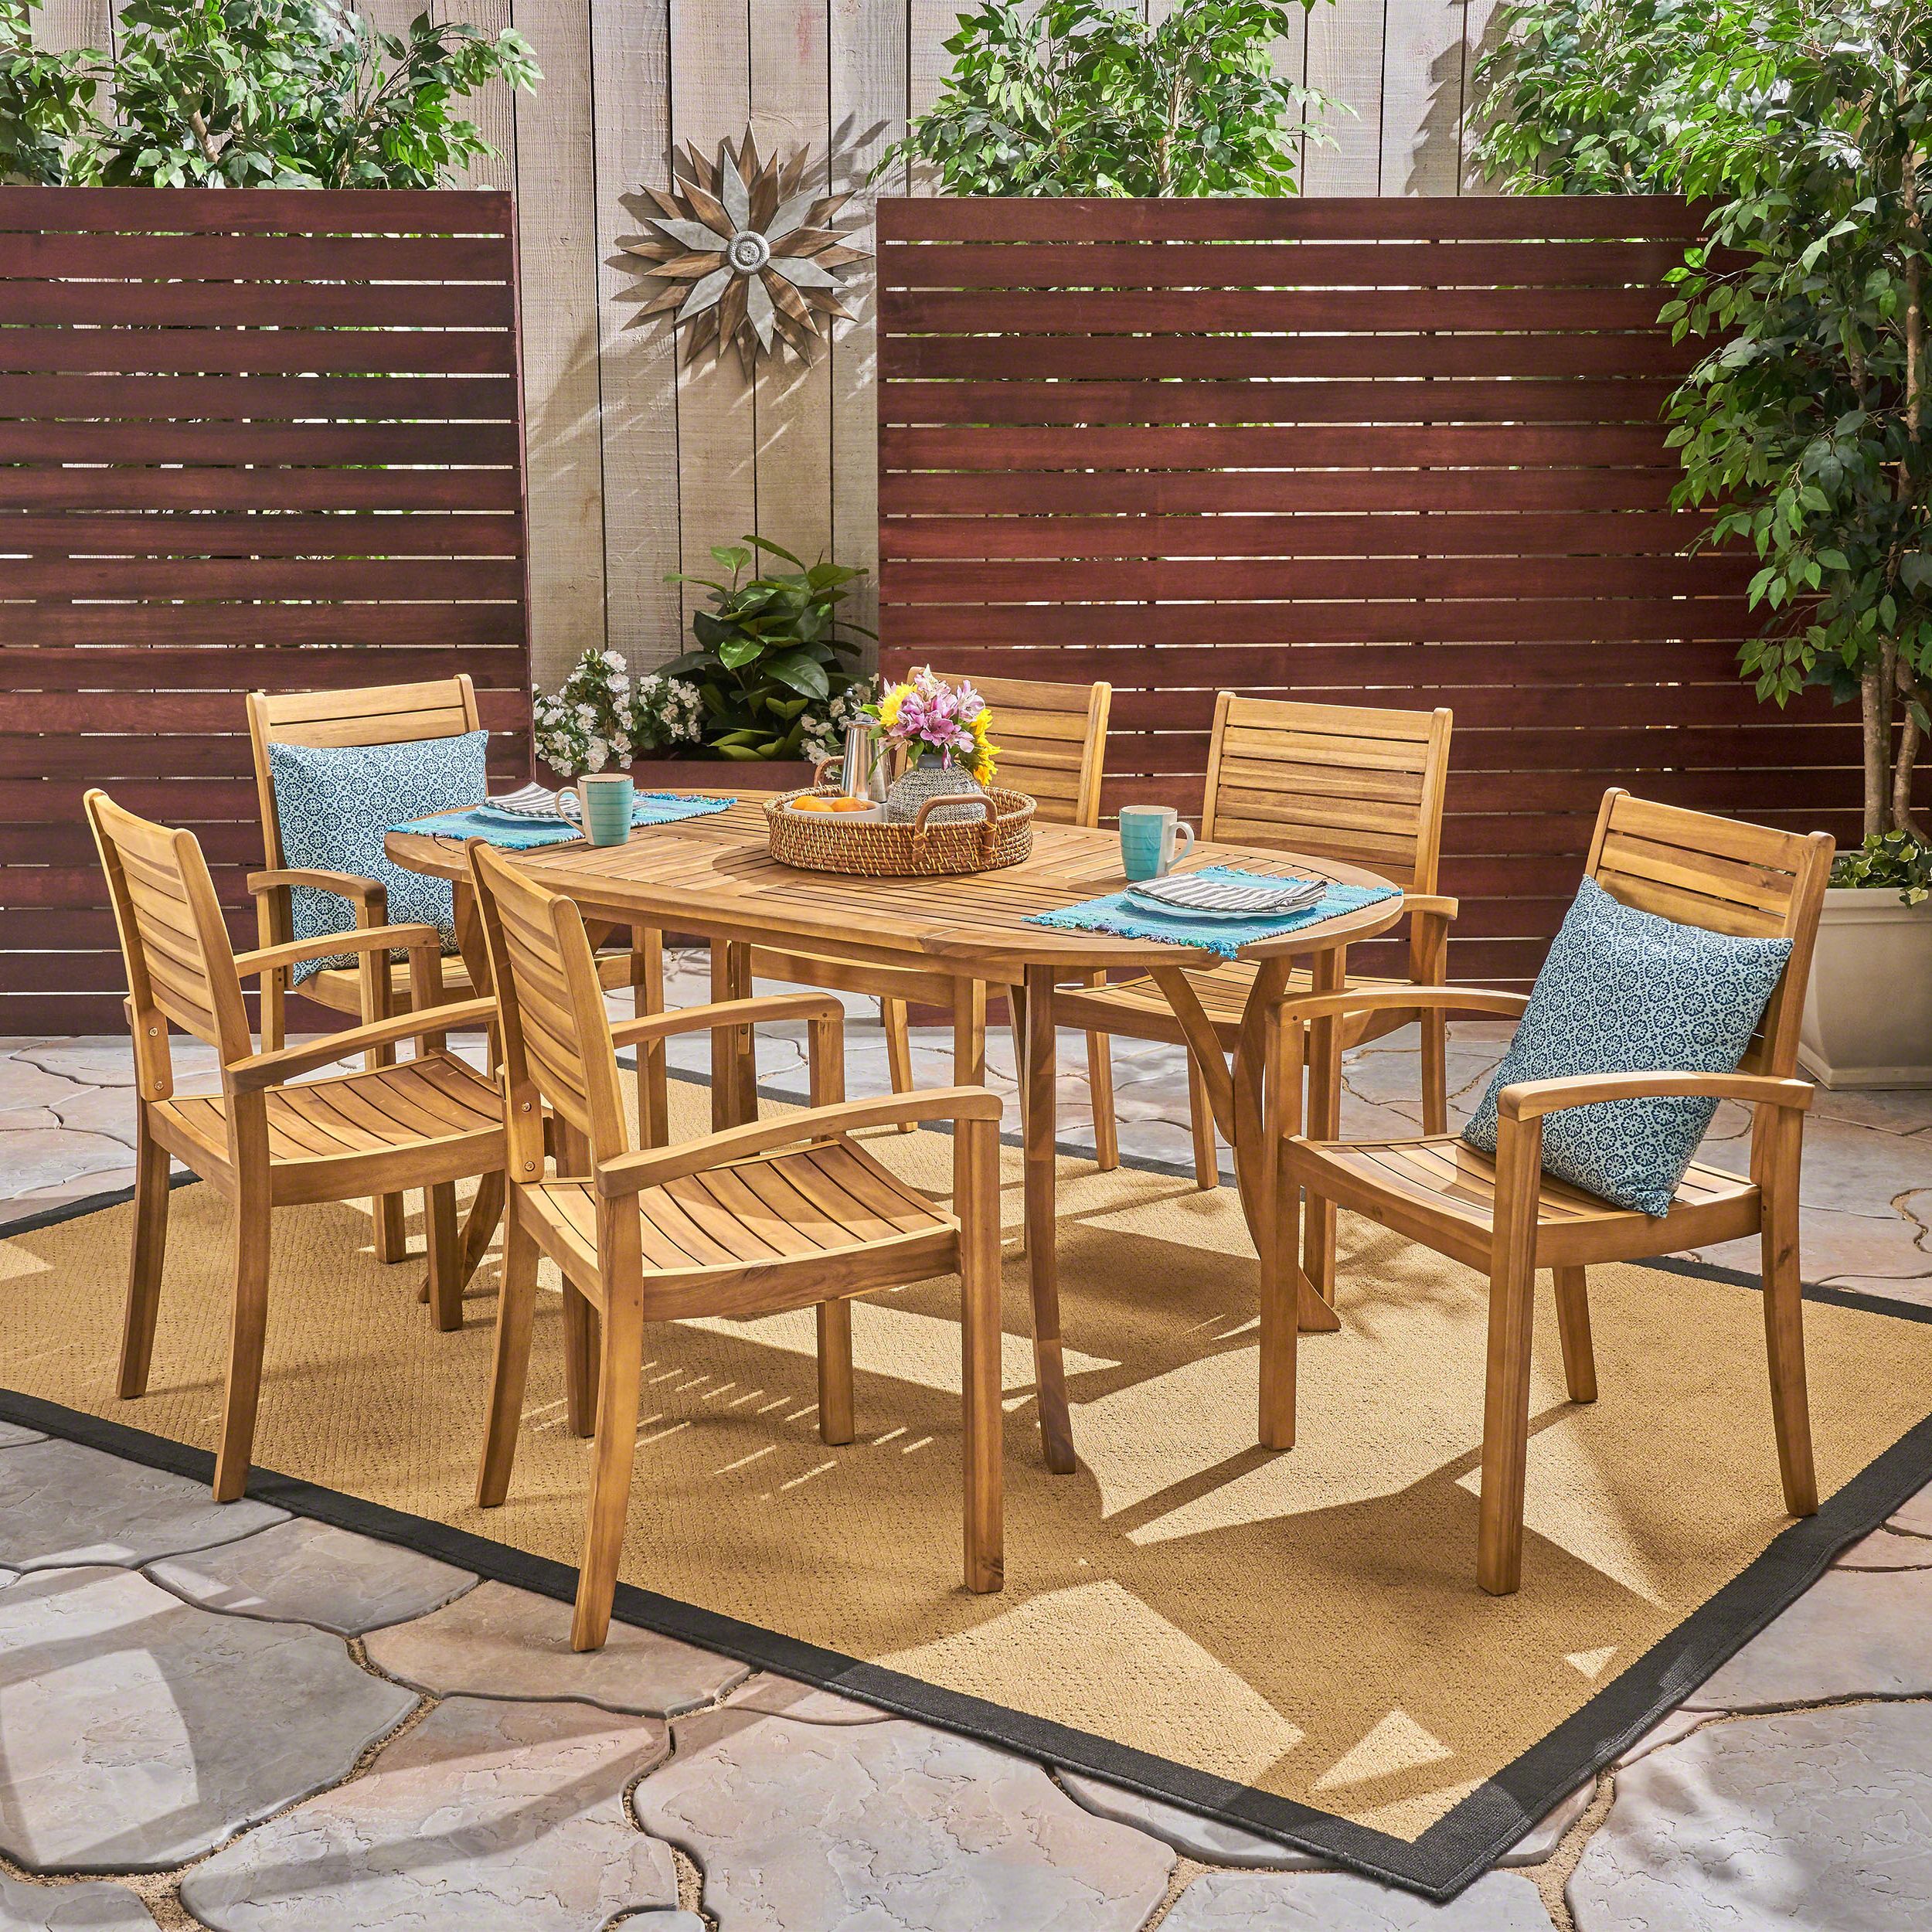 Newest Adriana Outdoor 7 Piece Acacia Wood Oval Dining Set, Teak – Walmart Pertaining To Oval 7 Piece Outdoor Patio Dining Sets (View 1 of 15)